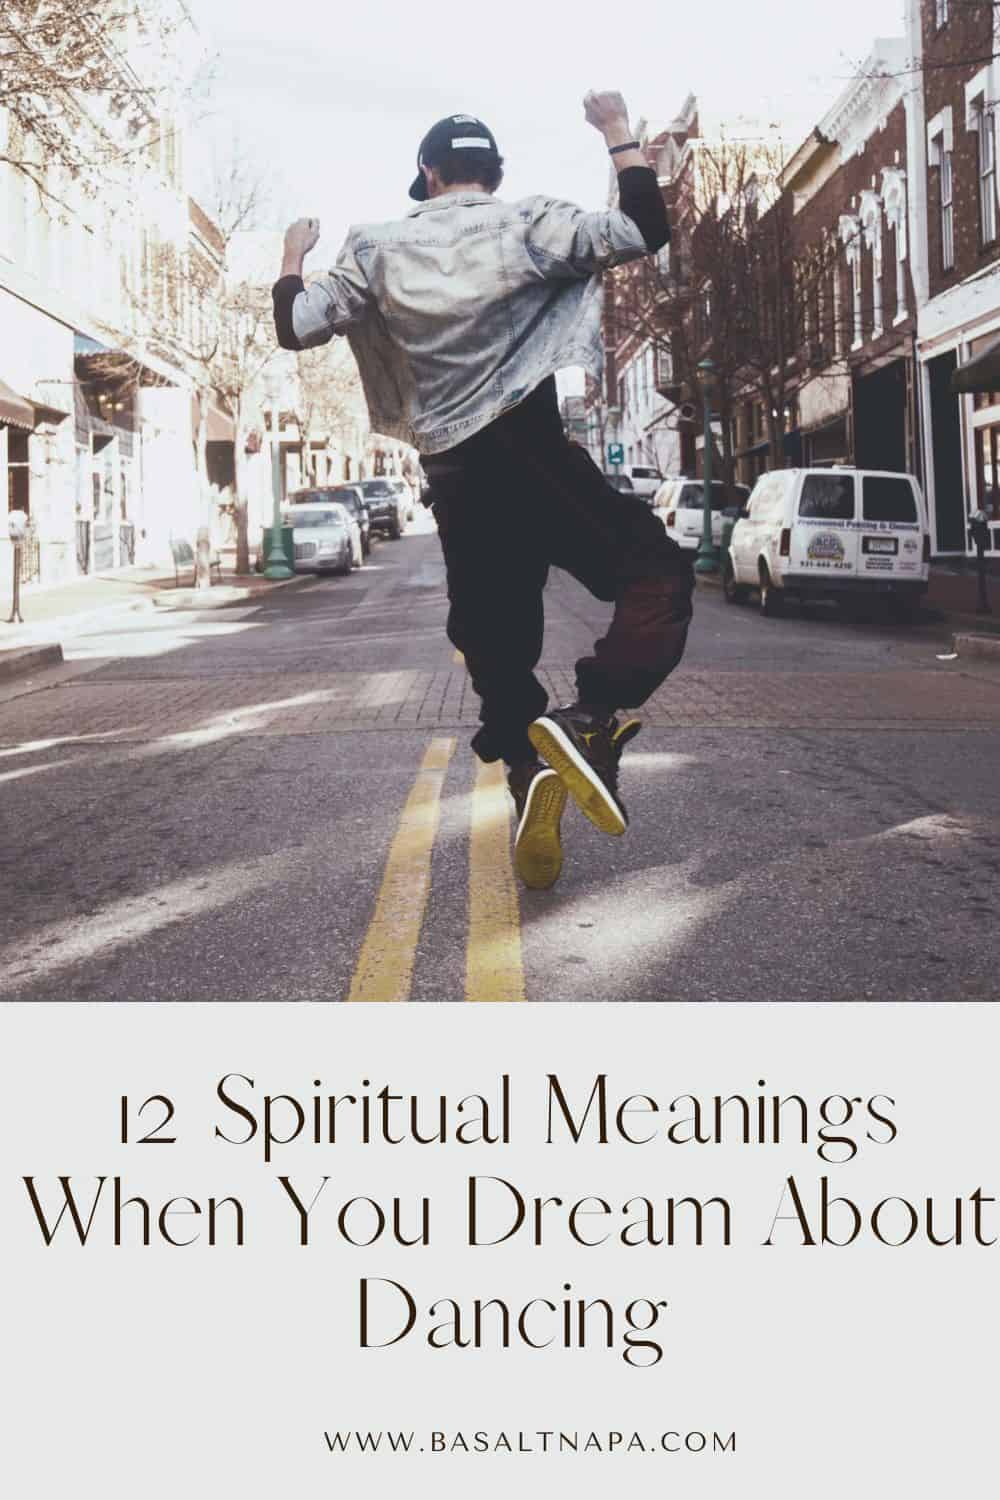 12 Spiritual Meanings When You Dream About Dancing